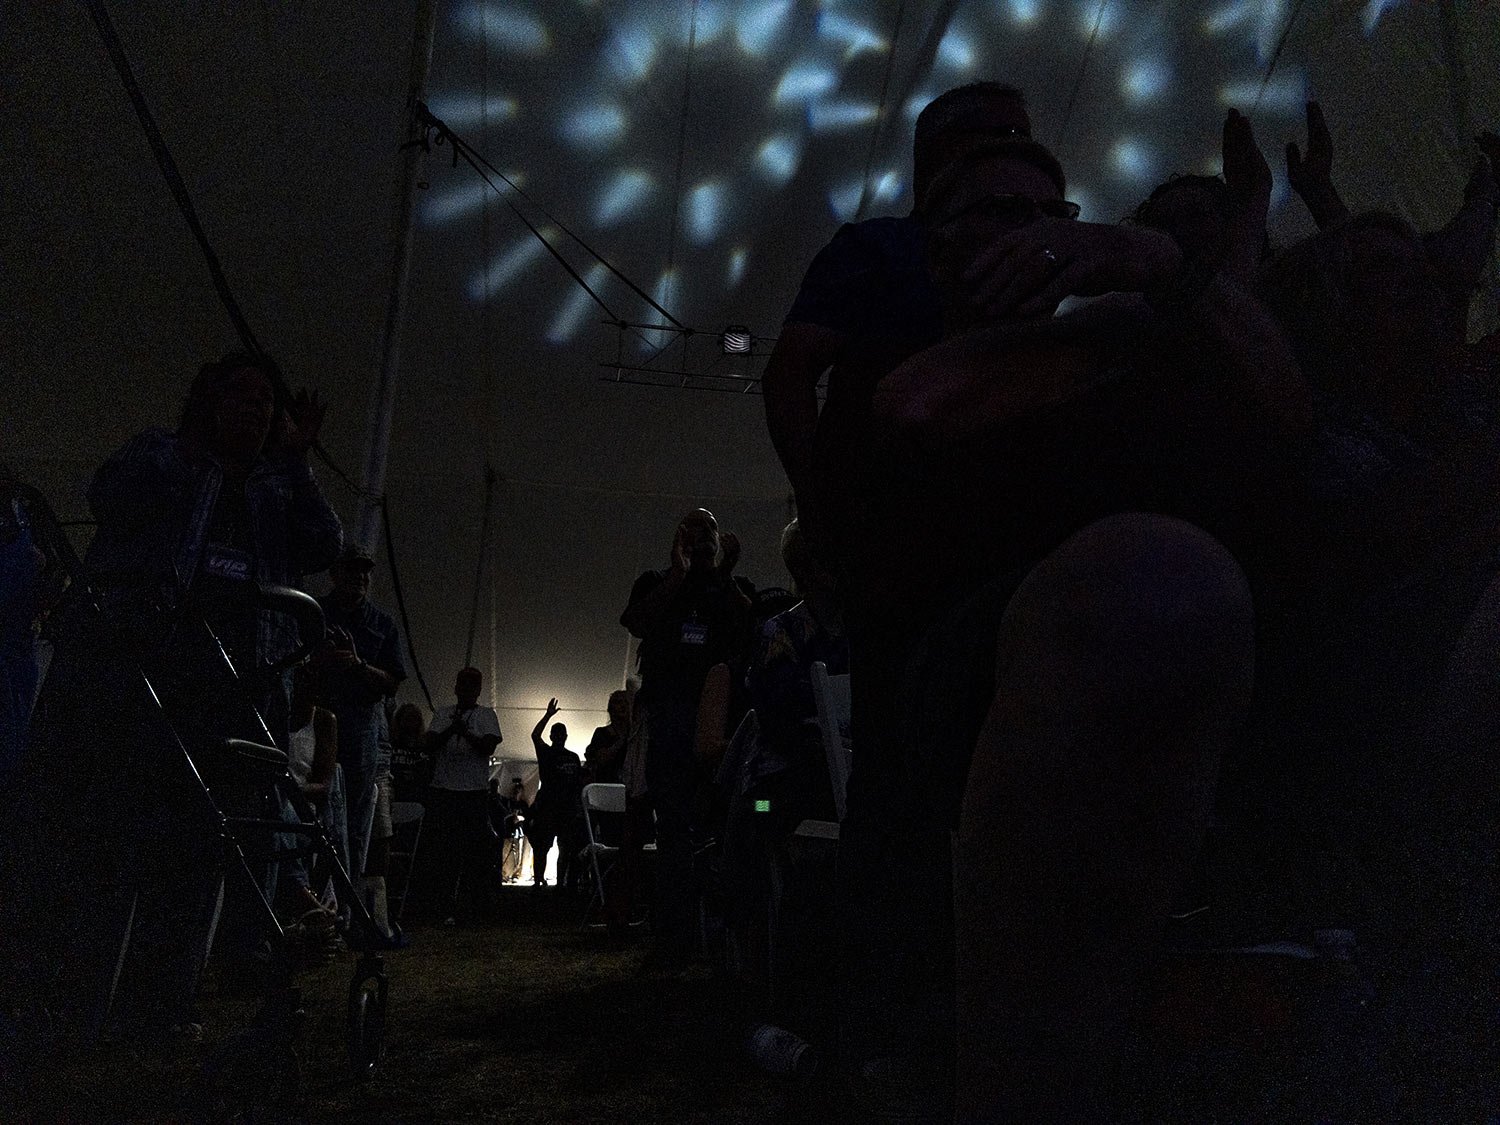  An audience member stands at the edge of the tent during the ReAwaken America Tour at Cornerstone Church in Batavia, N.Y., Aug. 12, 2022. (AP Photo/Carolyn Kaster) 